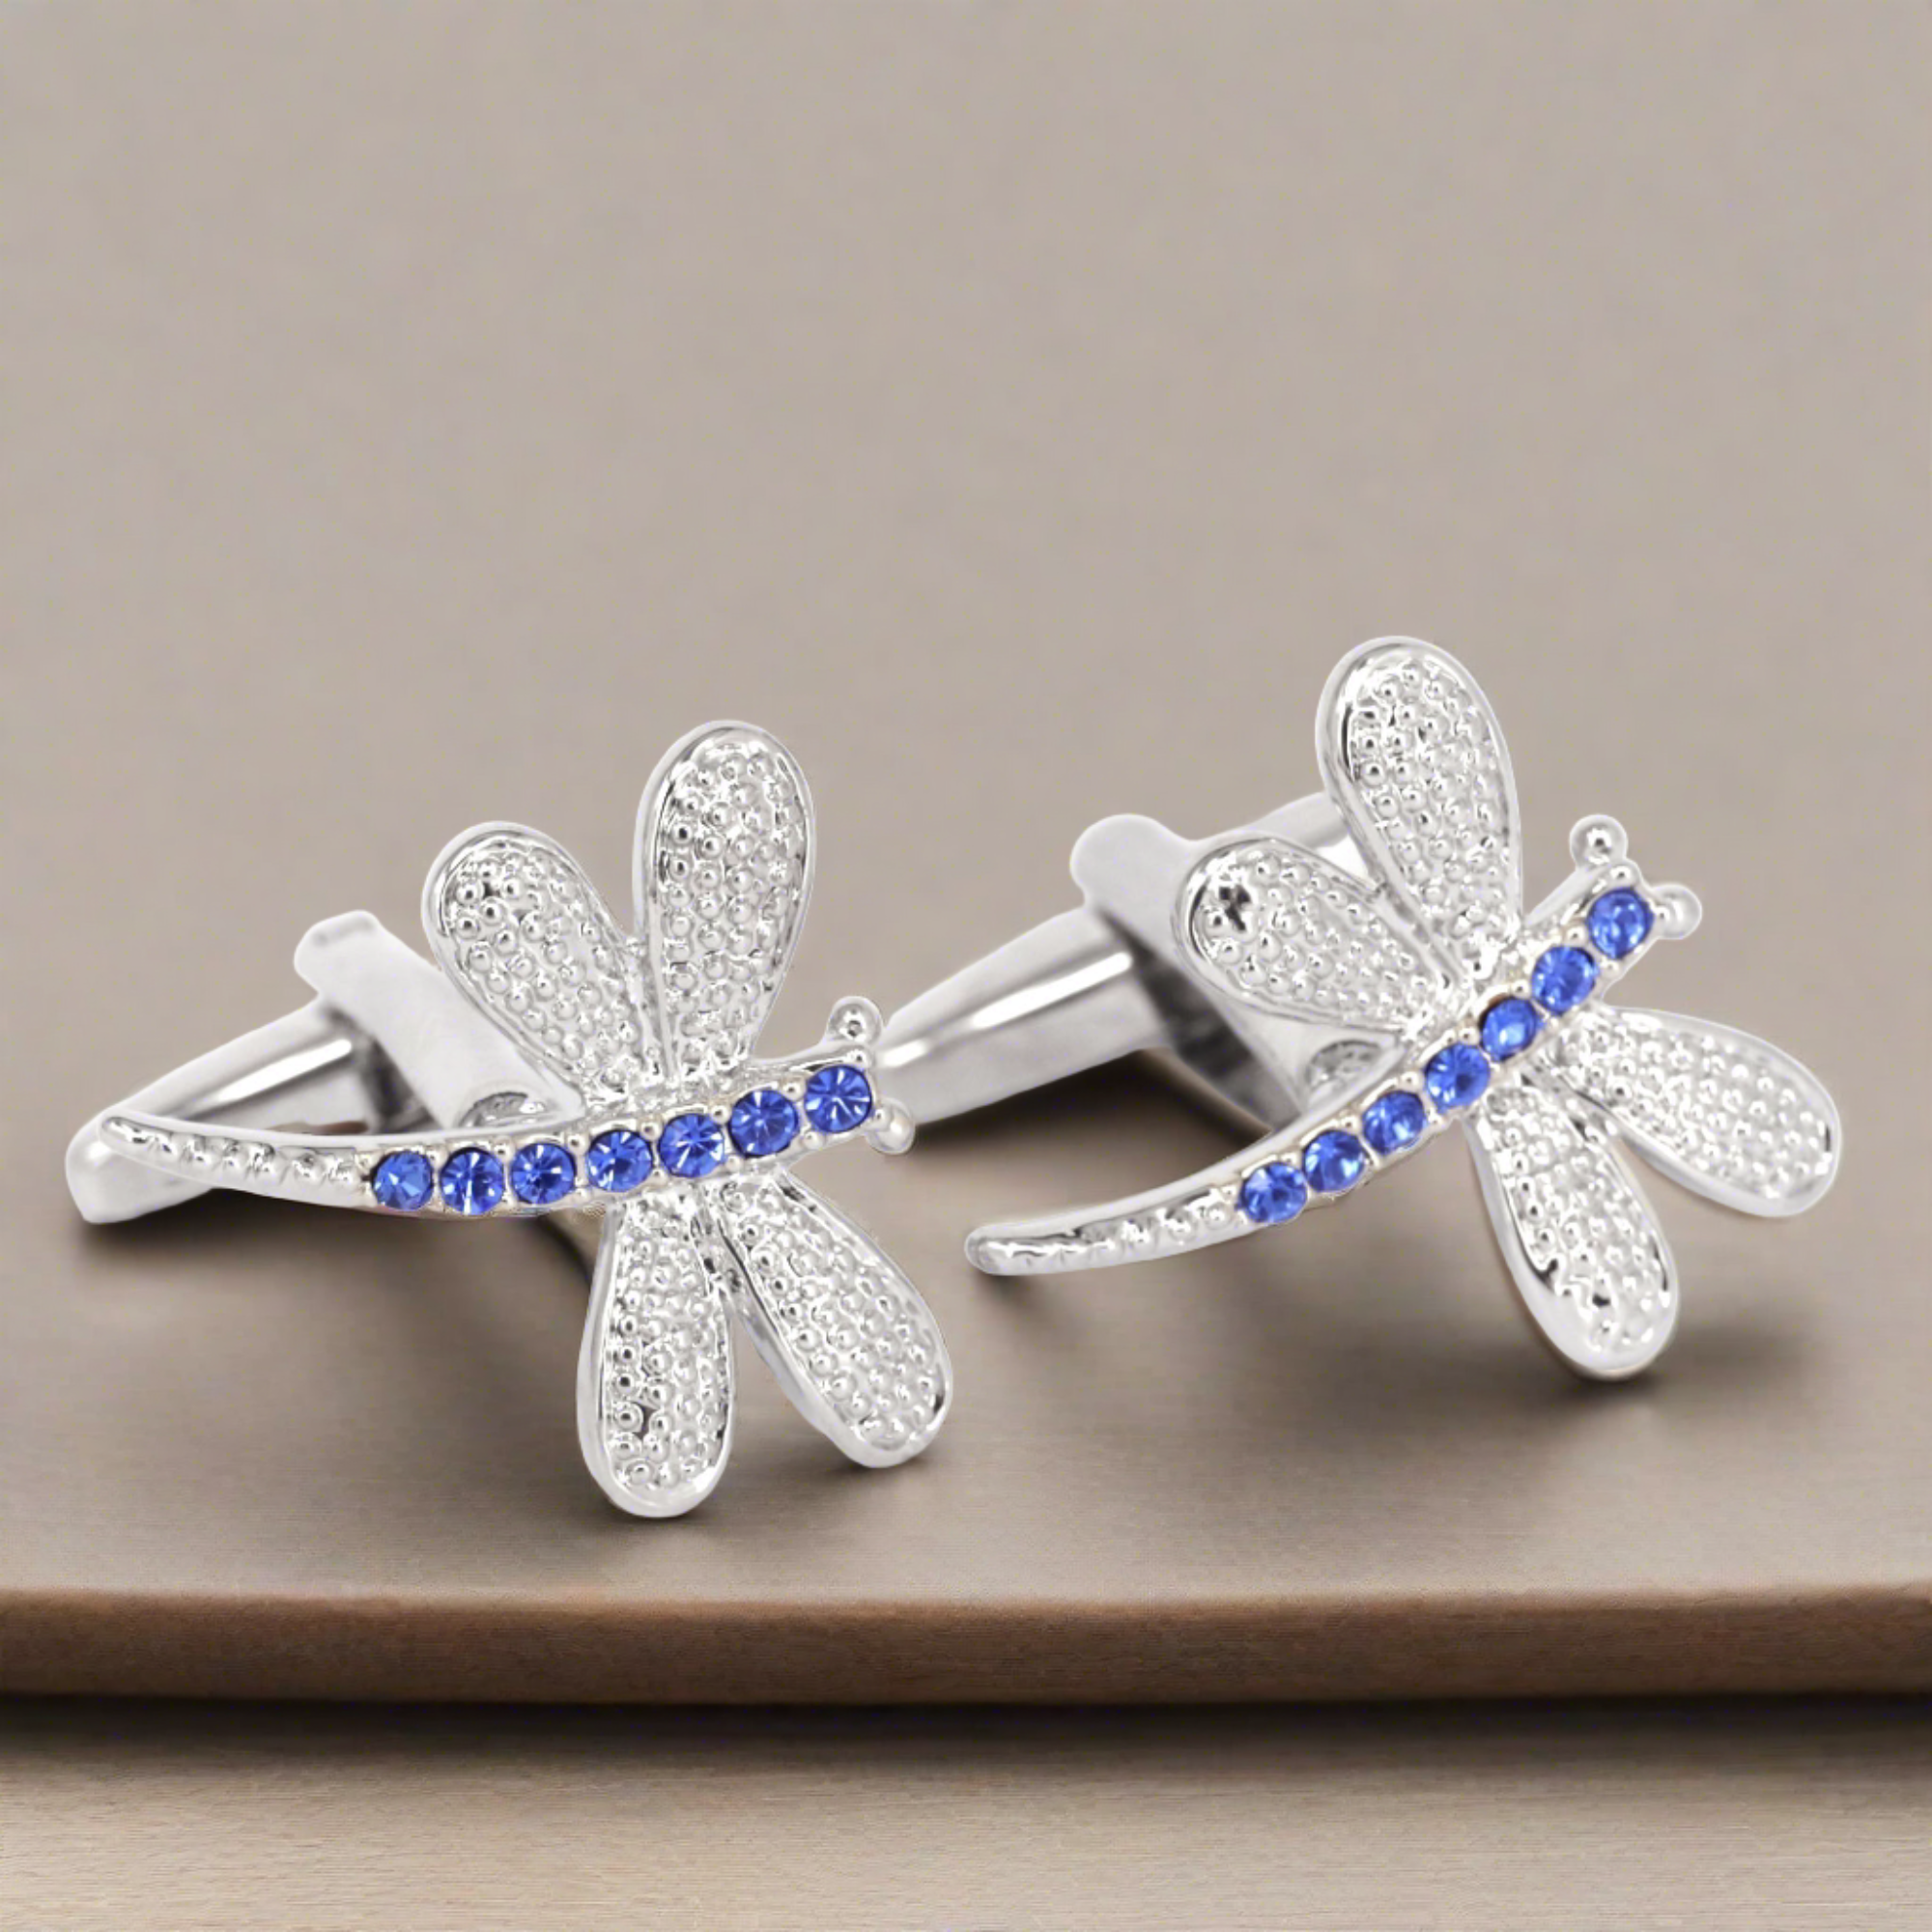 MarZthomson Dragonfly Cufflinks with Clear Crystals (Online Exclusive)